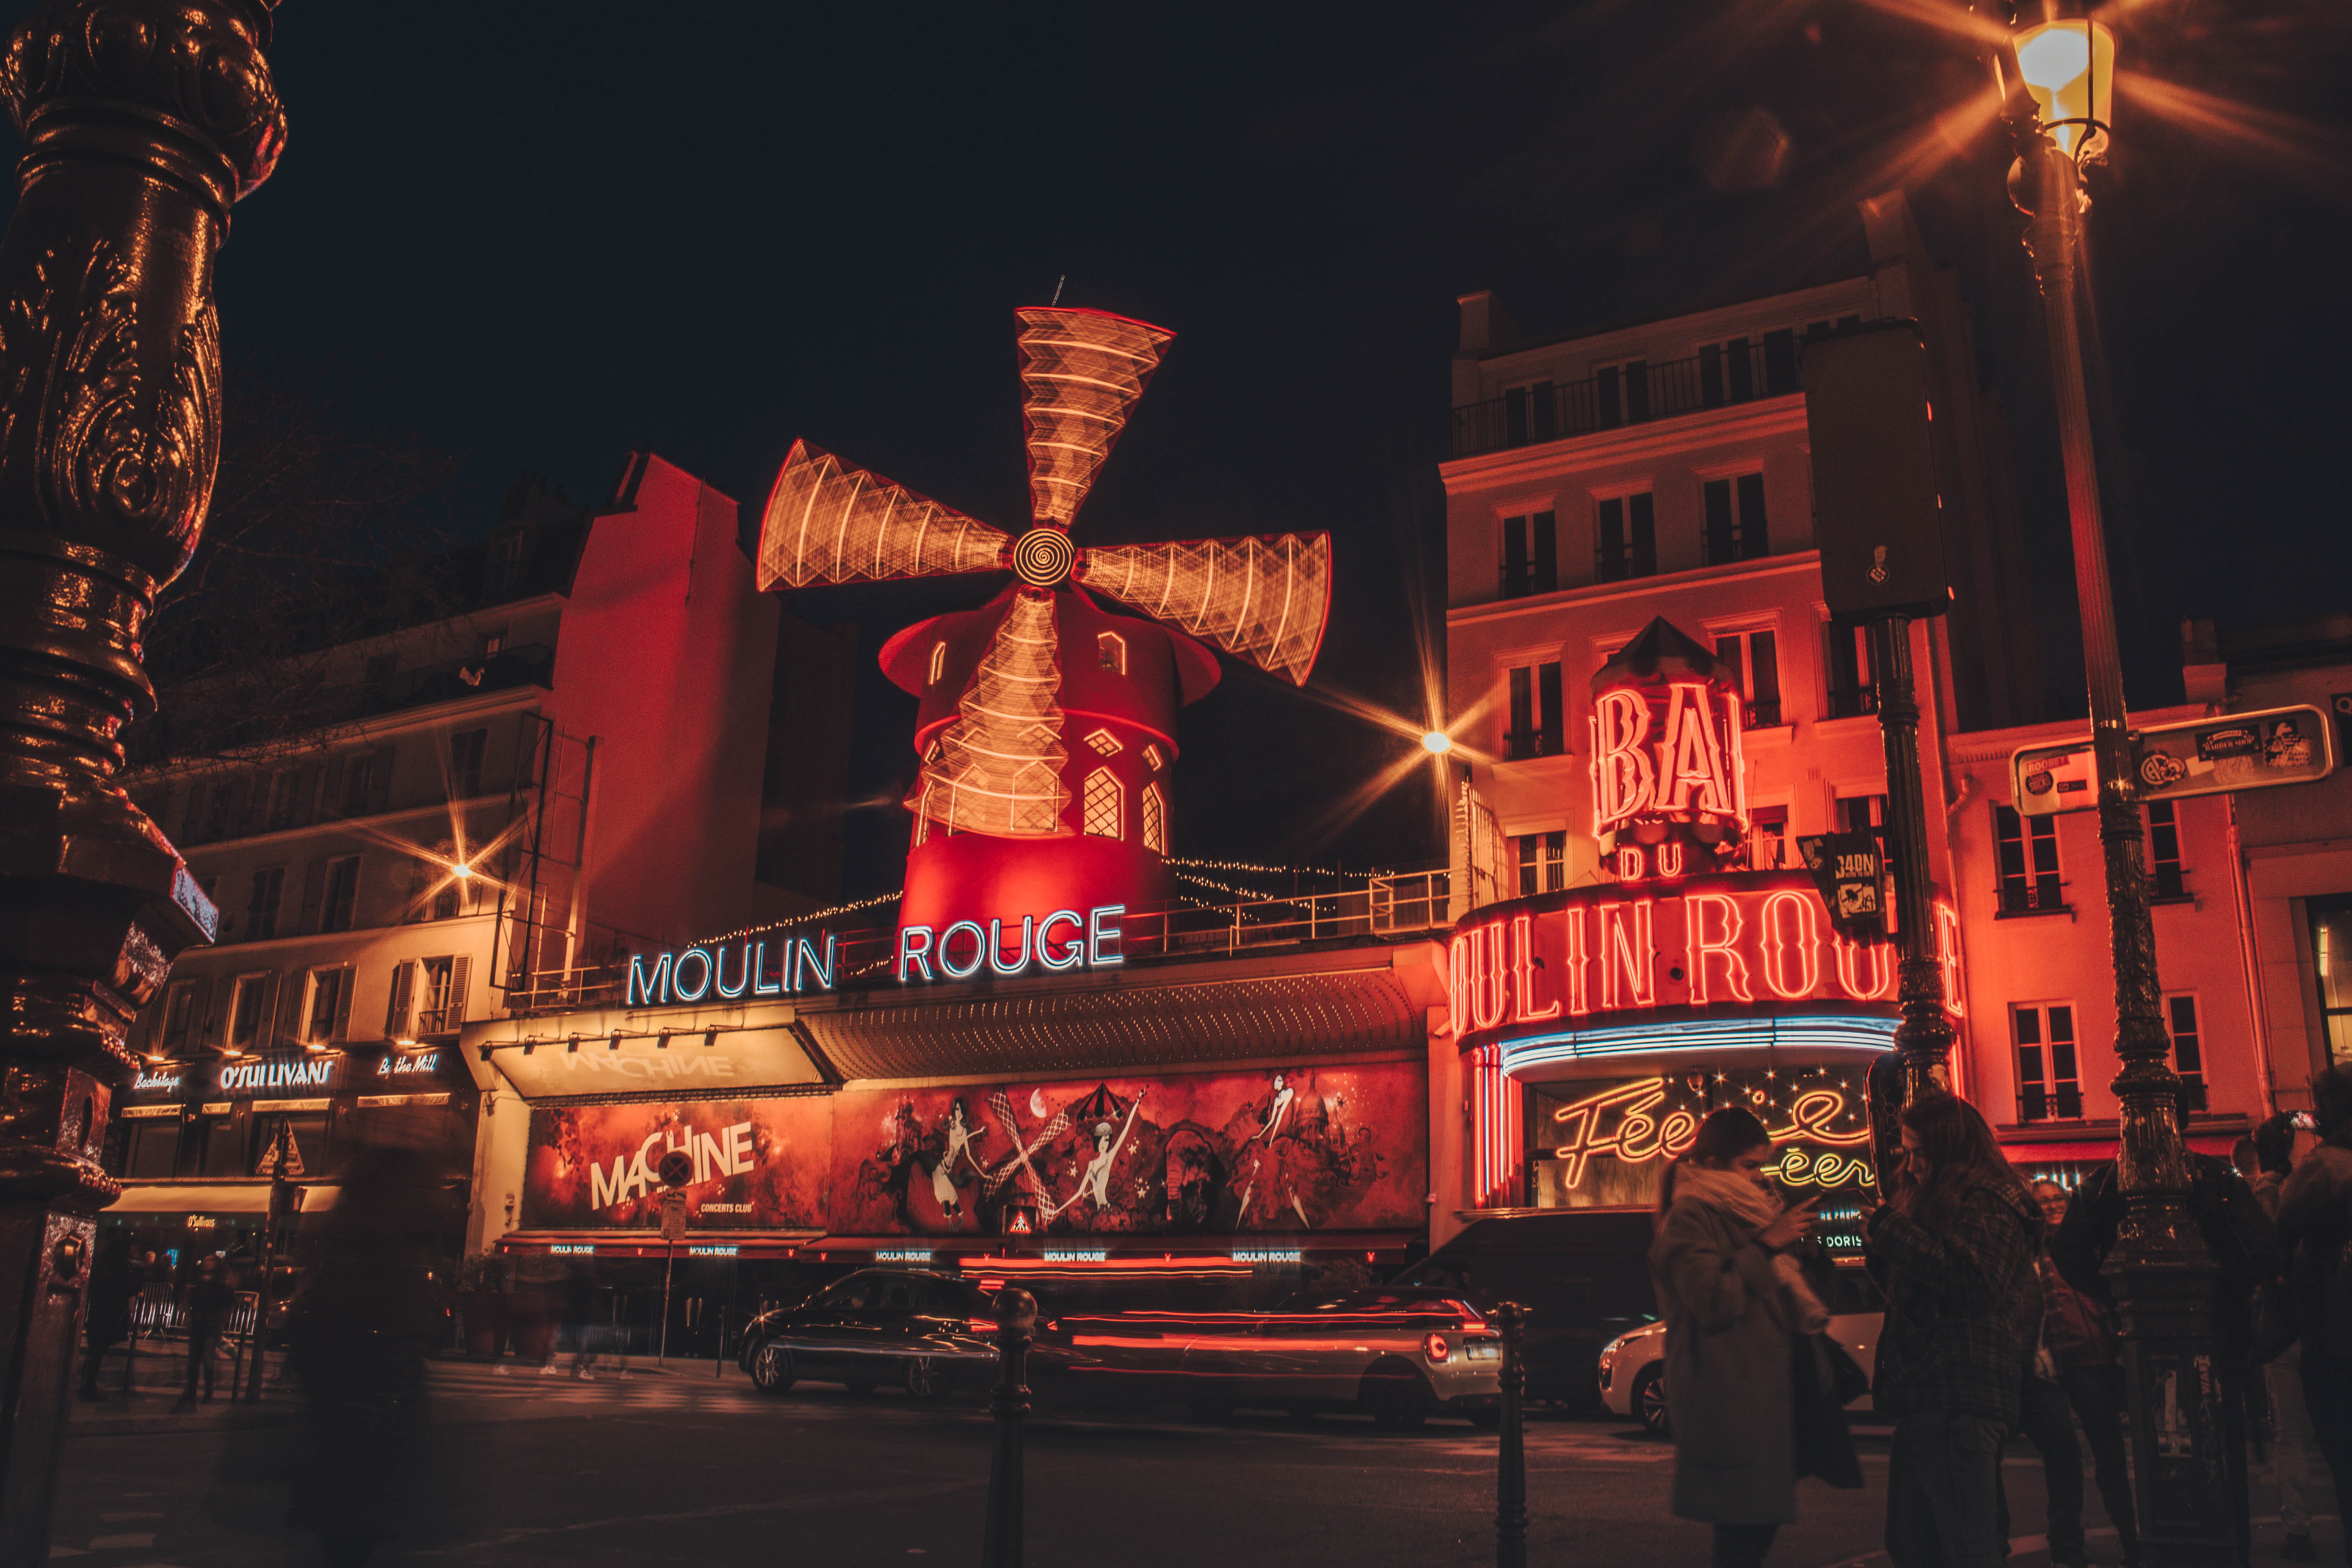 Moulin Rouge building during nighttime, illuminated, building exterior